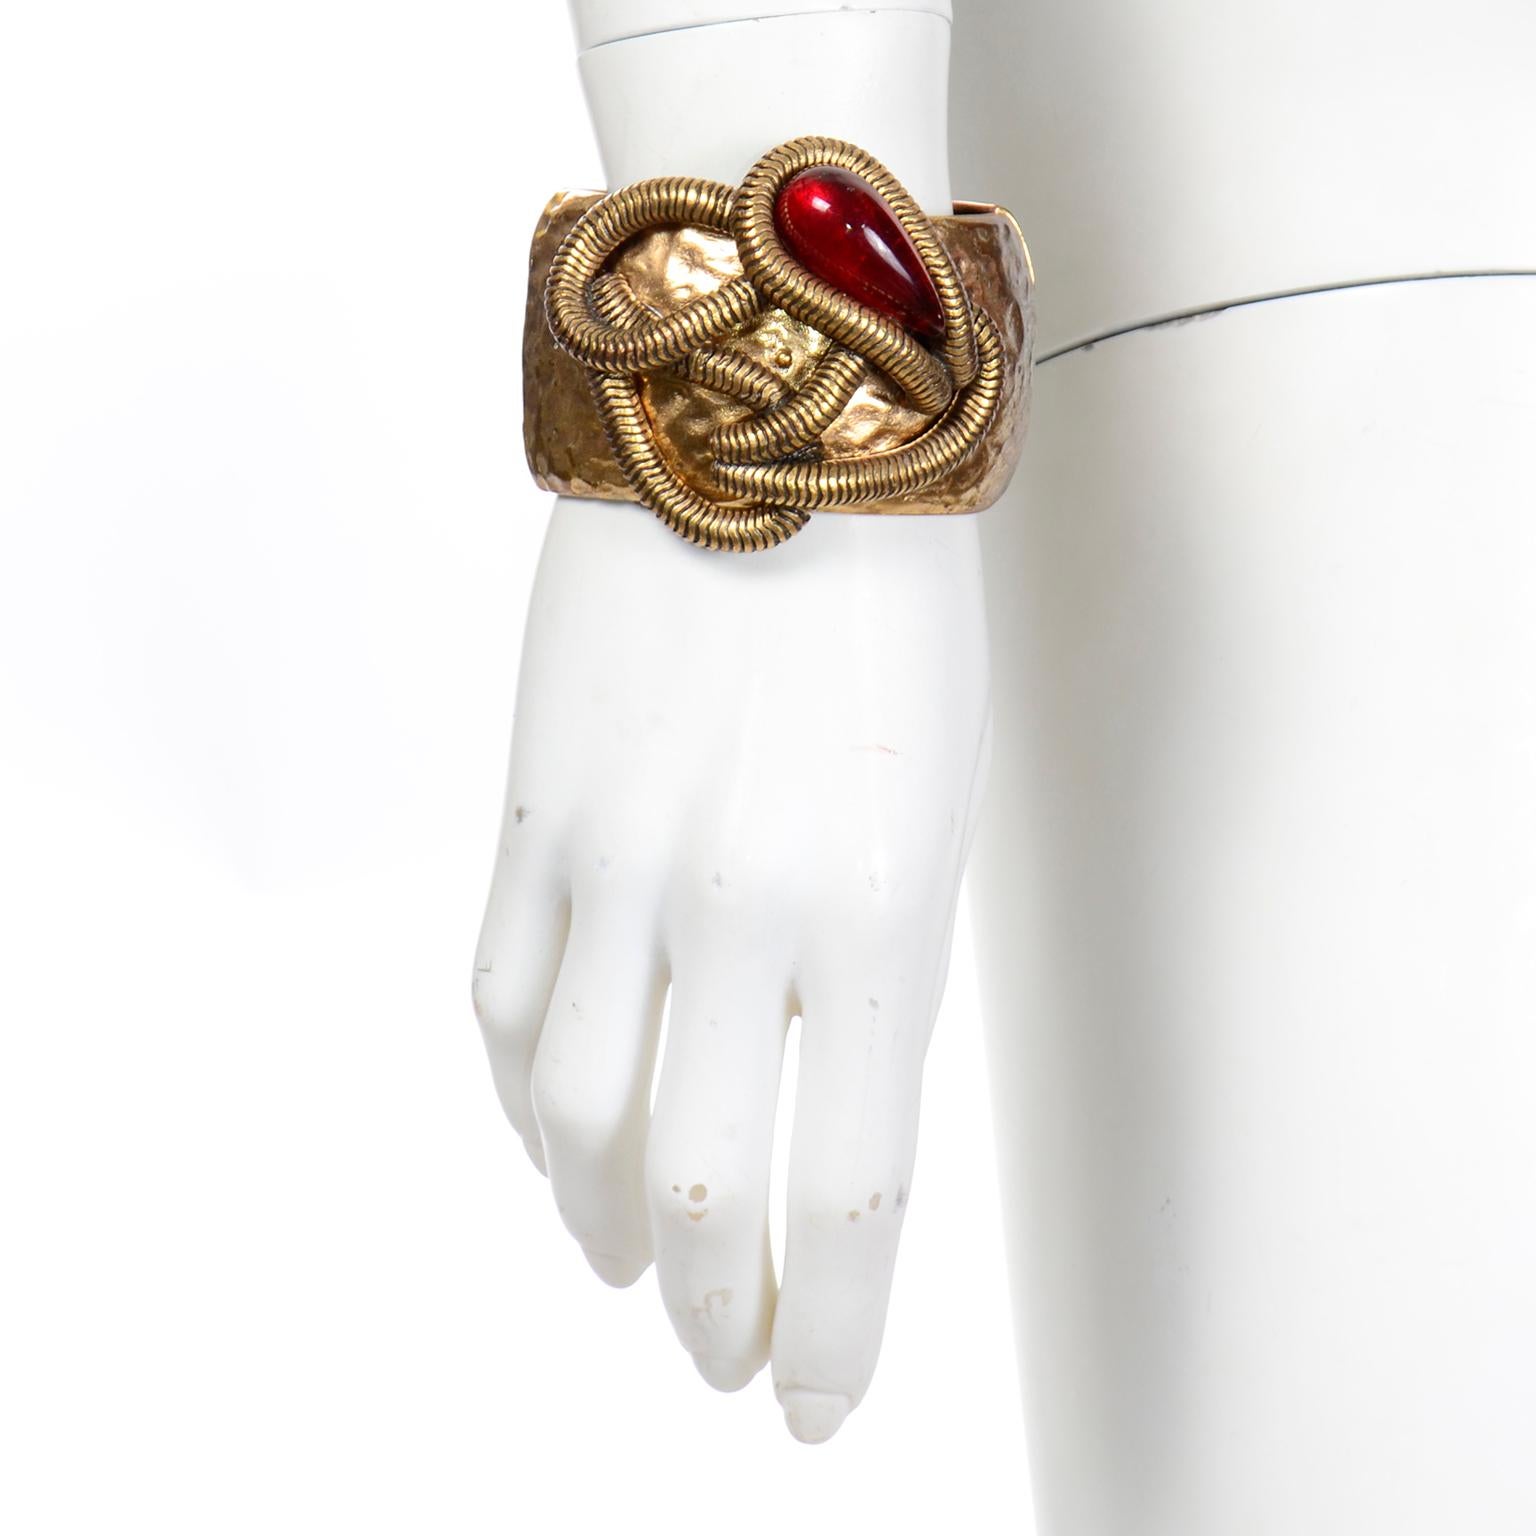 This is a stunning vintage Oscar de la Renta brutalist style Clamper bracelet in a hammered gold metal with a teardrop shaped red cabochon. There are rich variations in the color, creating dimension and we love the twisted snake chain metal that